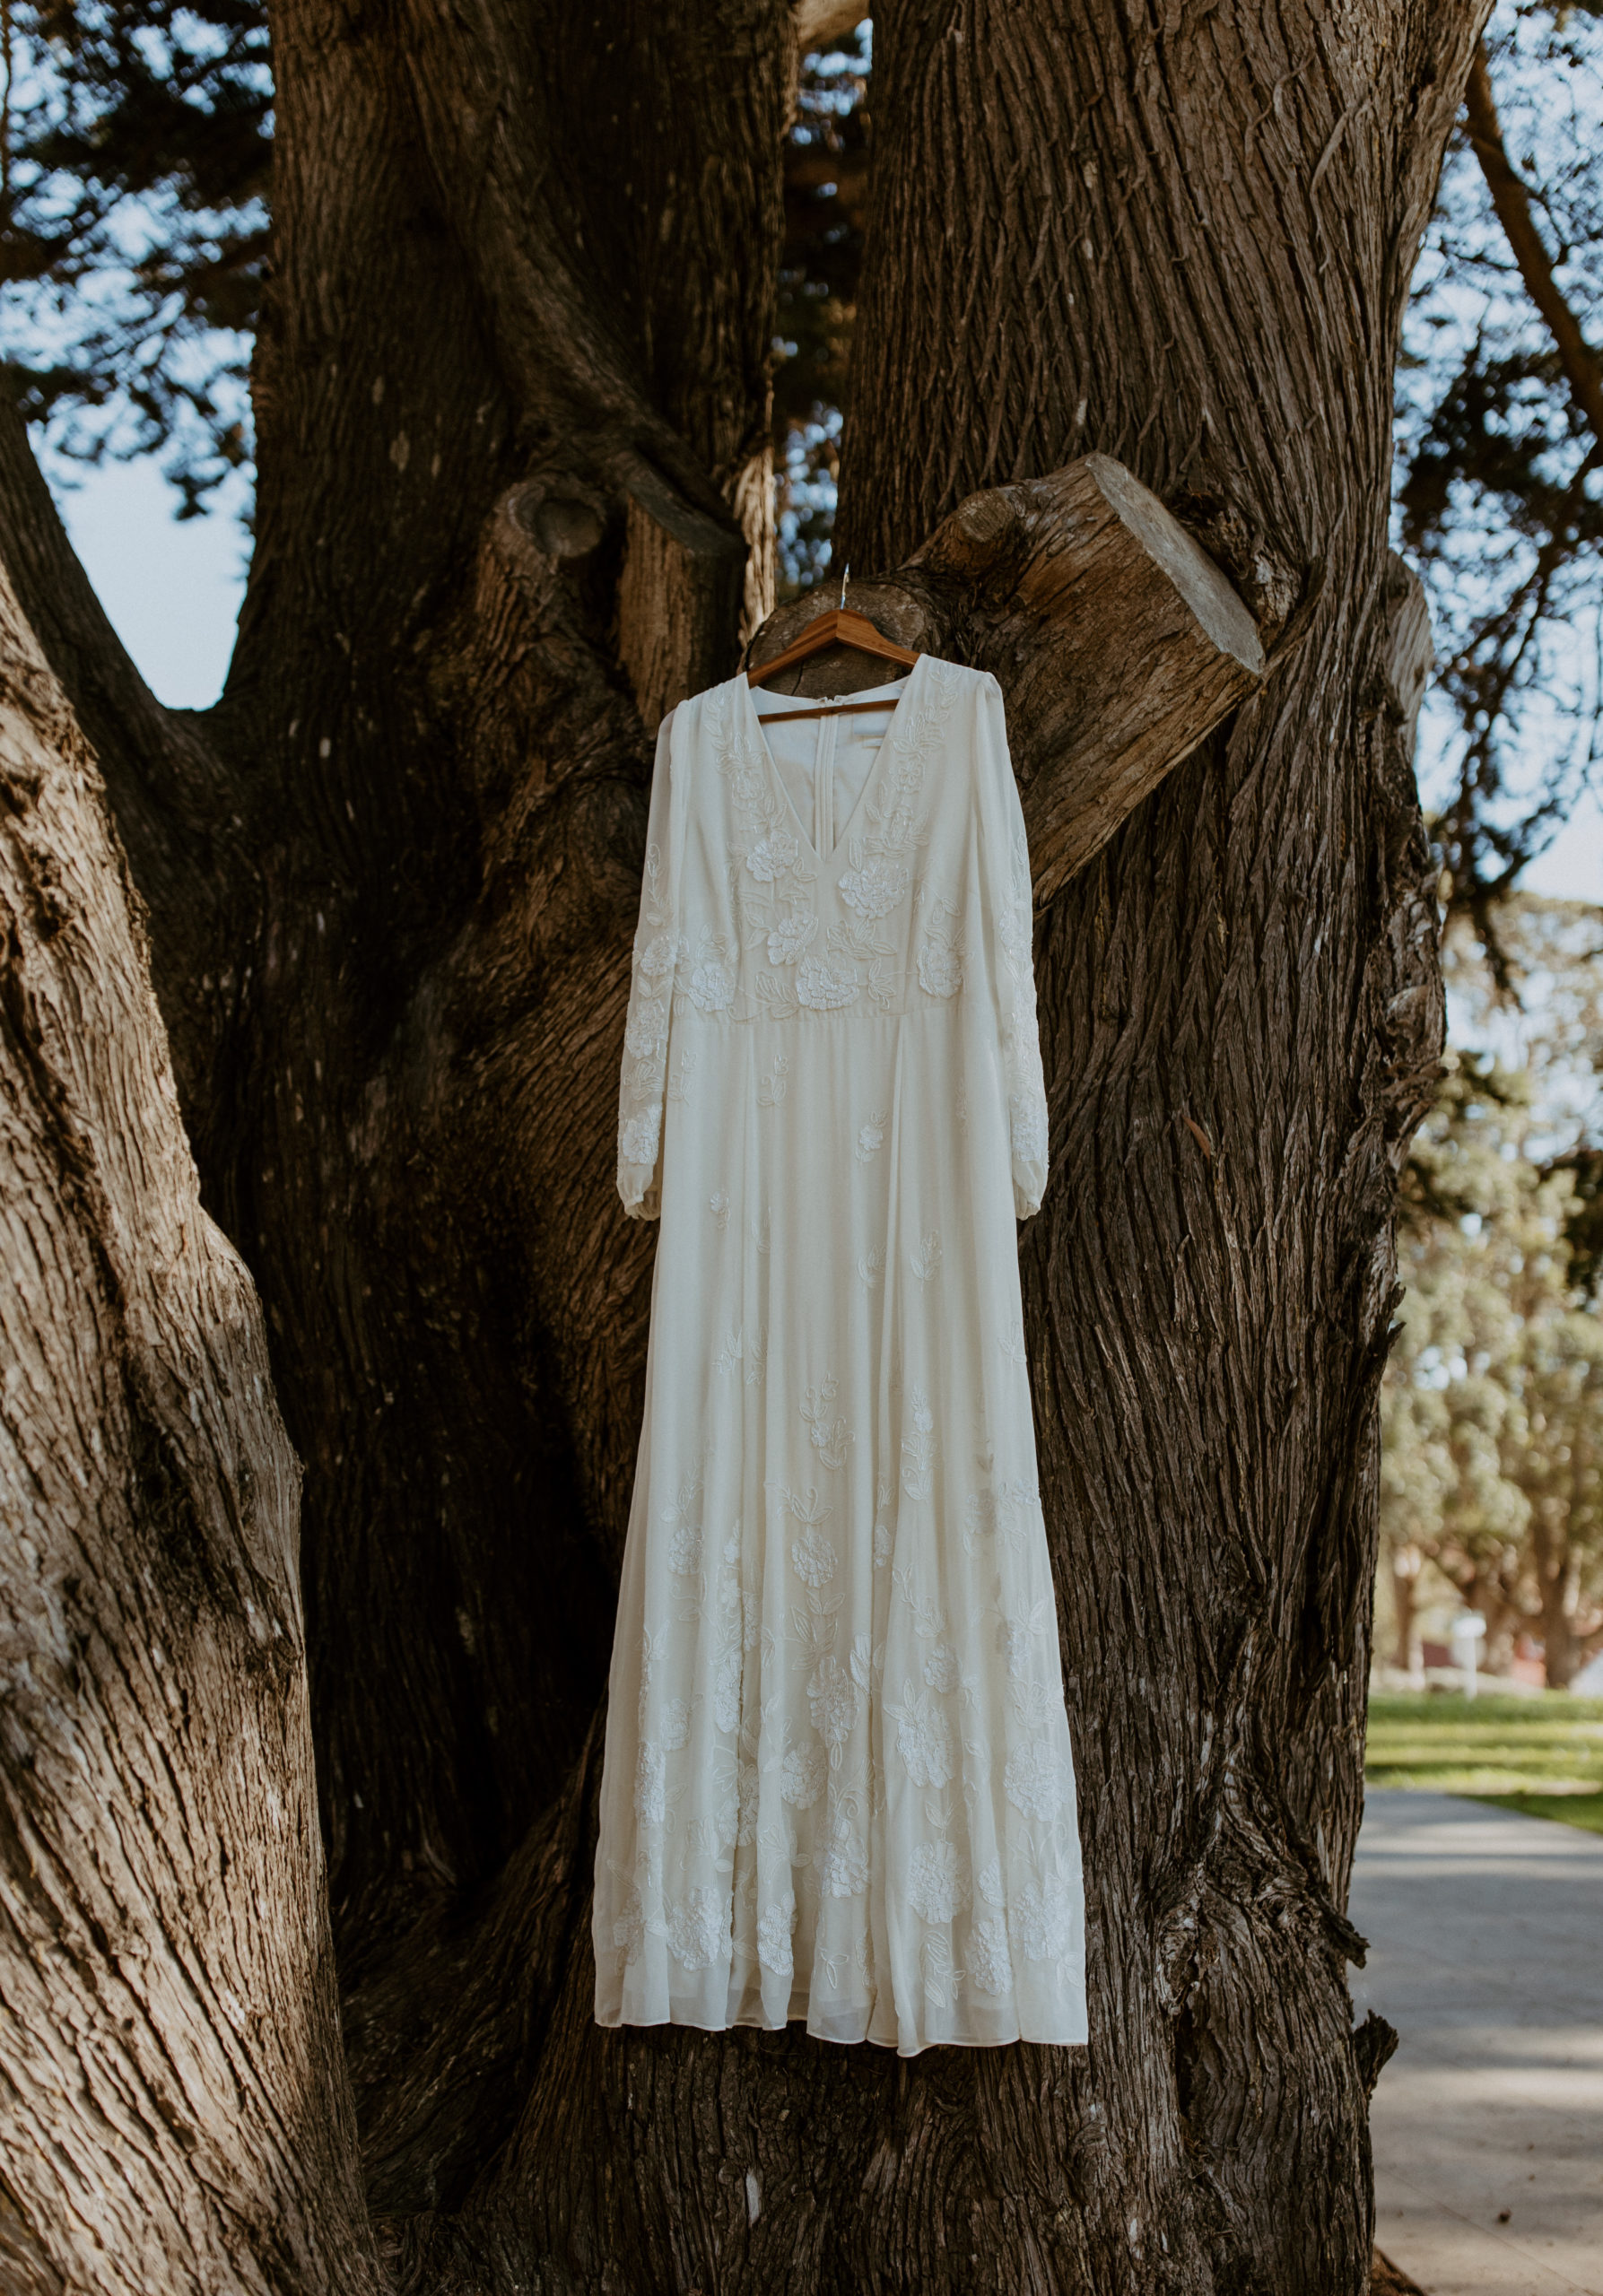 the wedding dress hanging in the trees